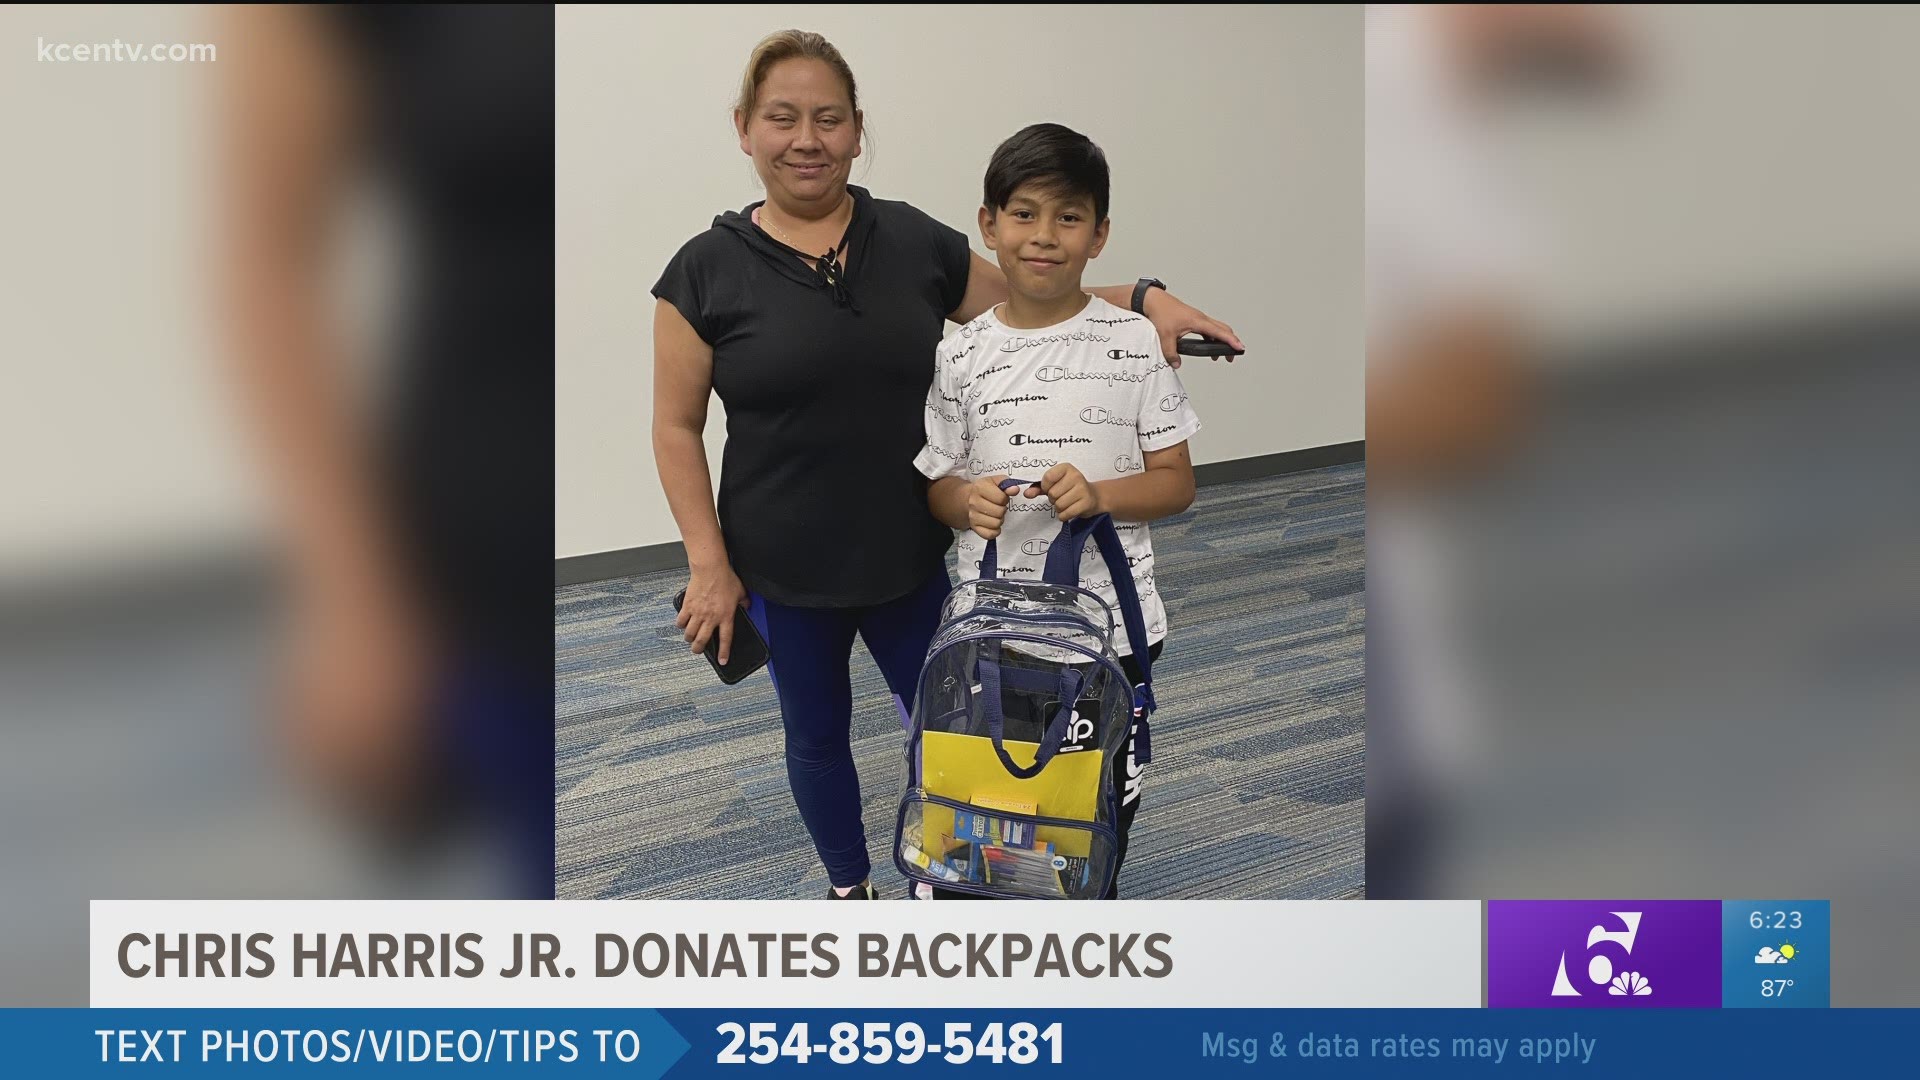 The backpacks were filled with school supplies for kids in need.